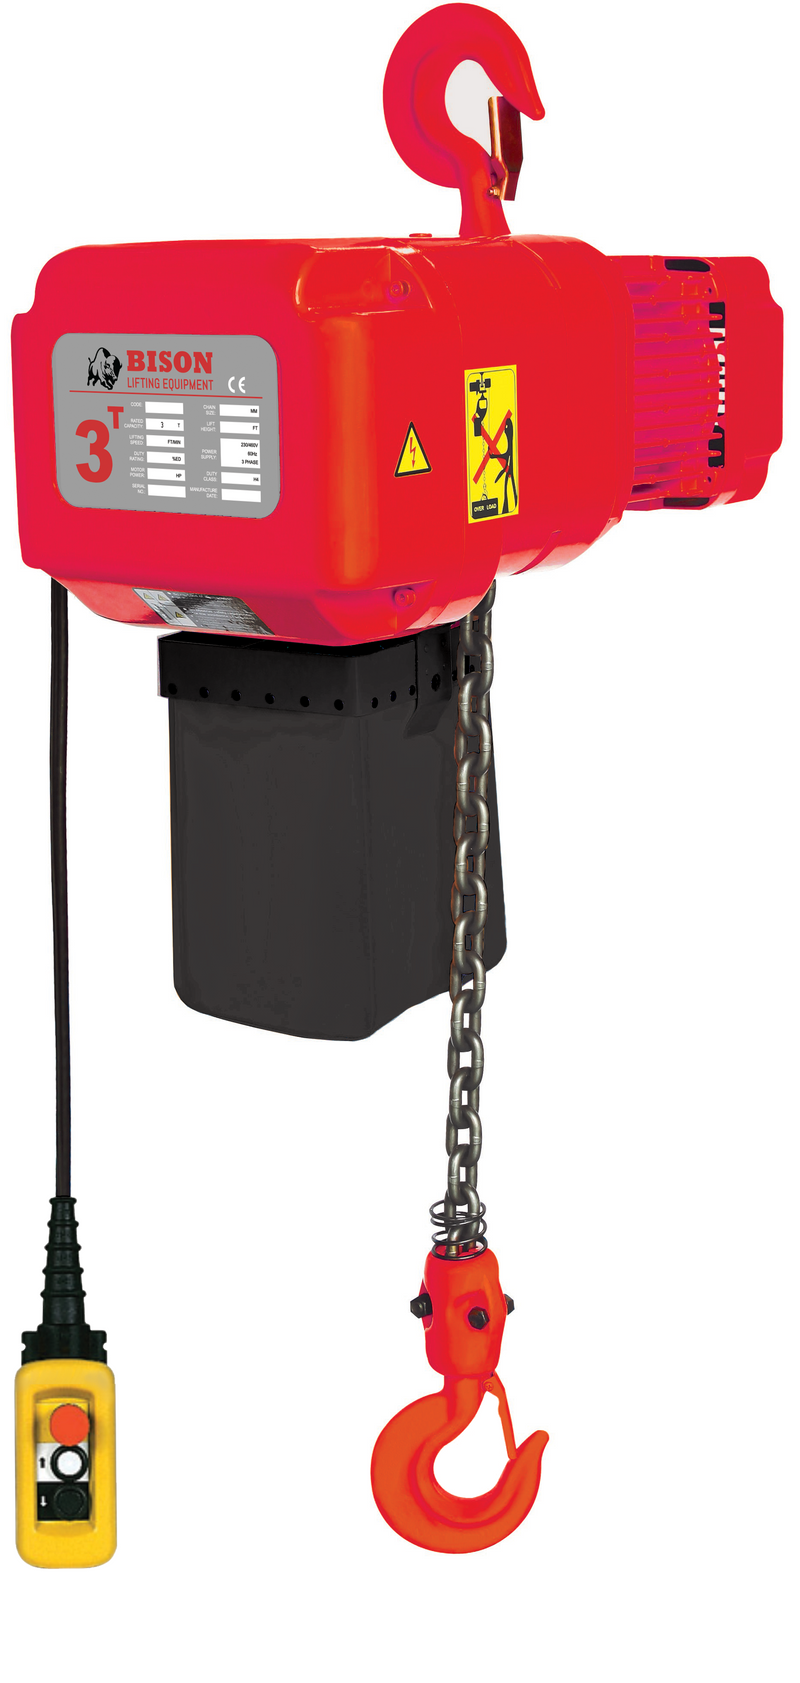 3 ton Electric Chain Hoist - Bison Lifting - Single Speed, Three Phase, 20' Lift